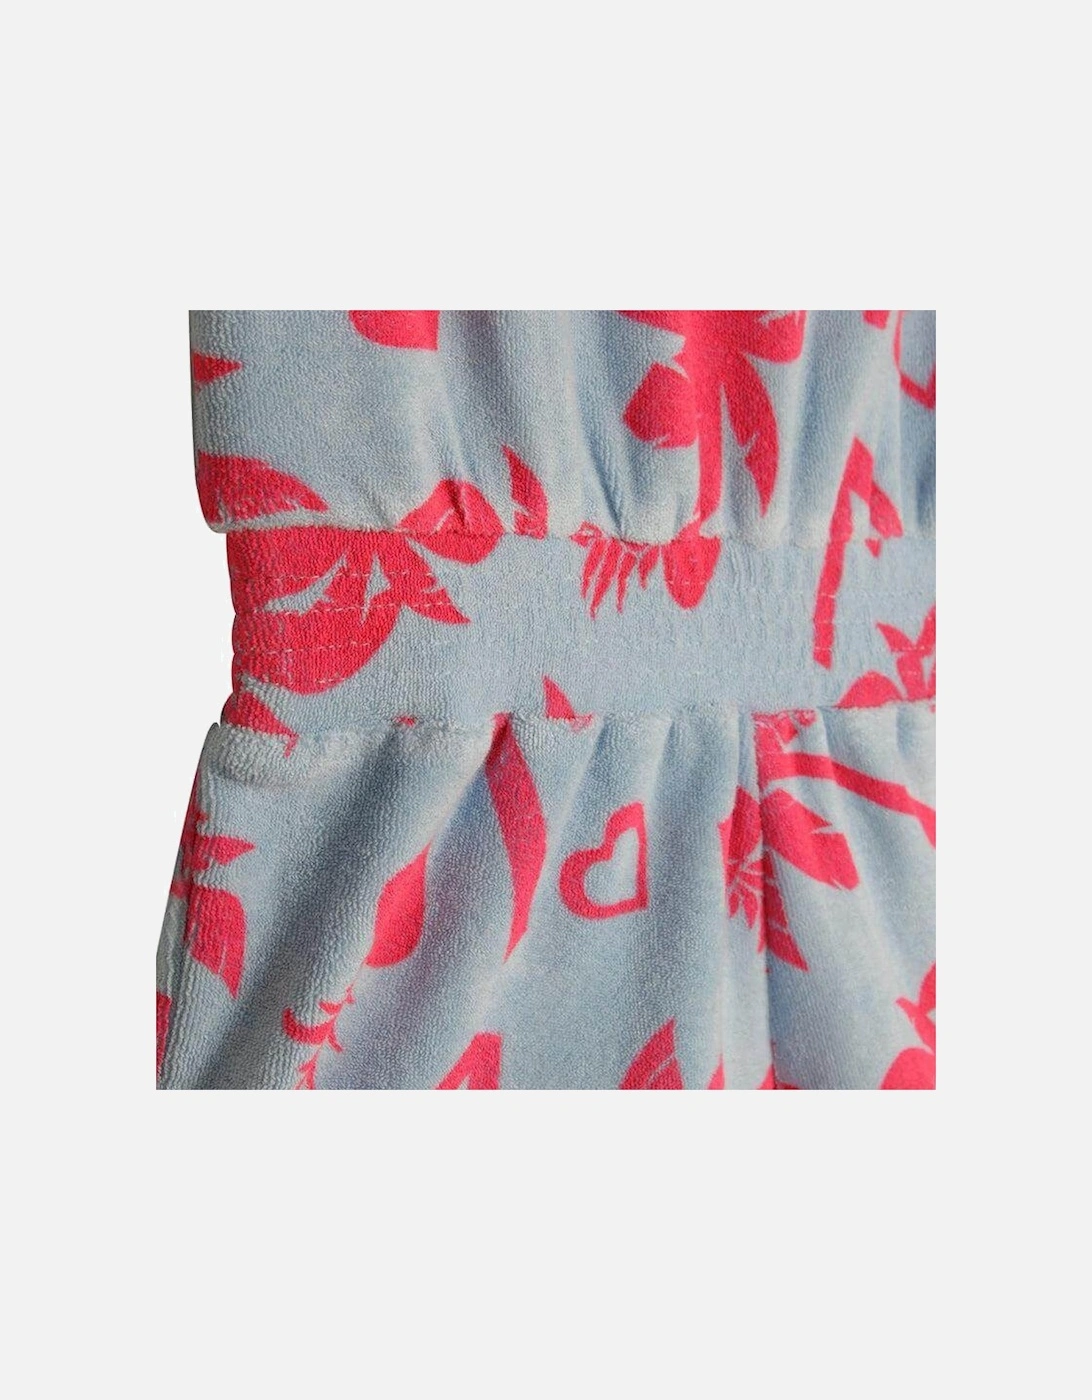 Girls Blue & Pink Towelling Palm Tree Playsuit